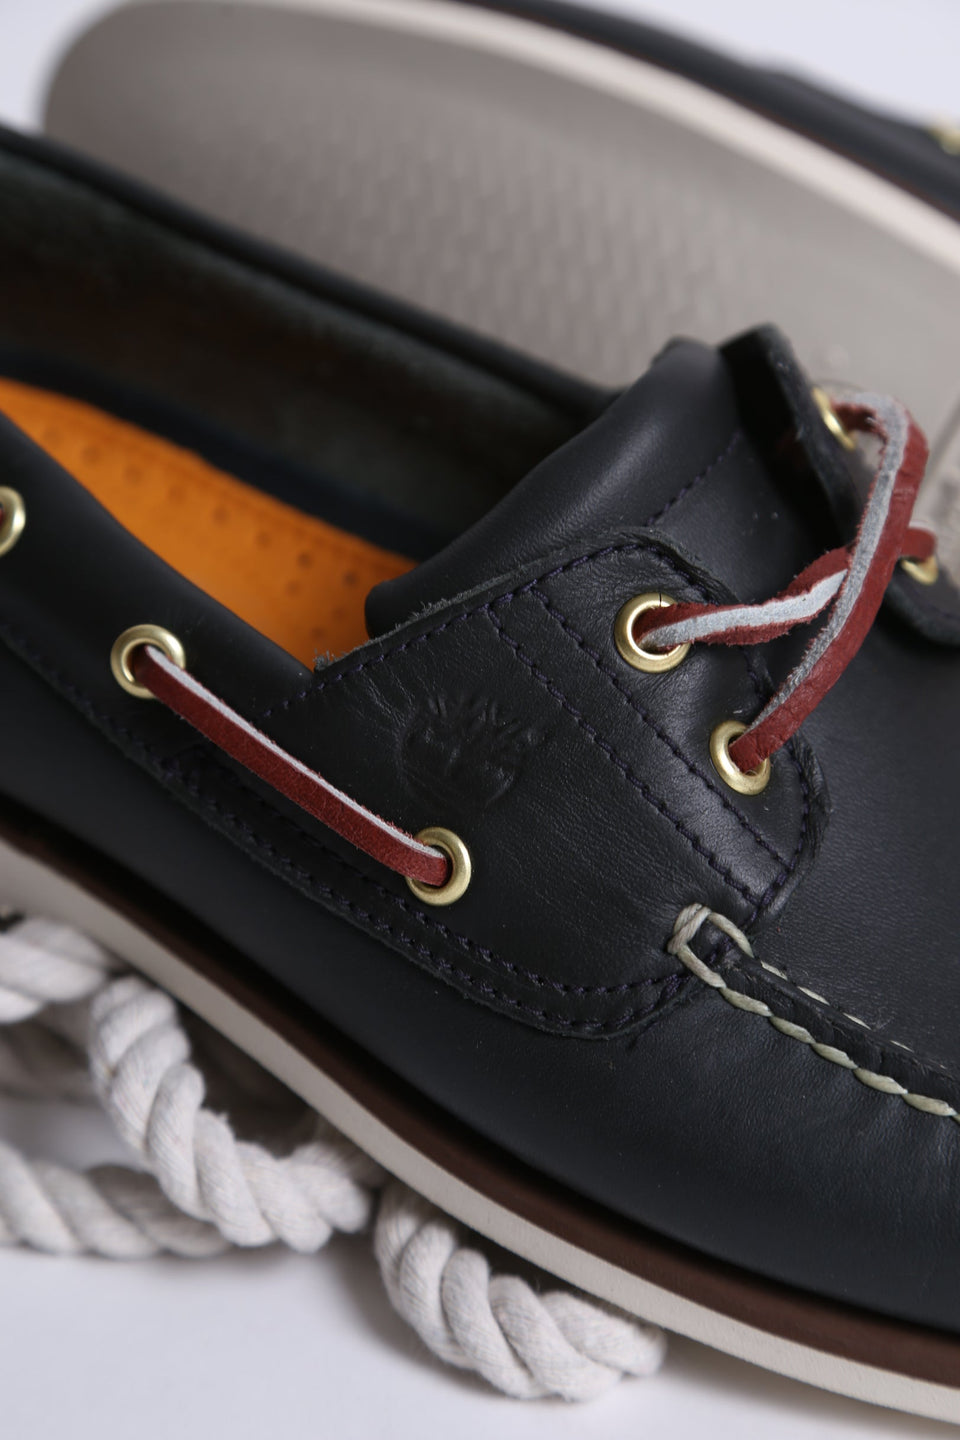 Timberland Classic Boat - Navy Blue